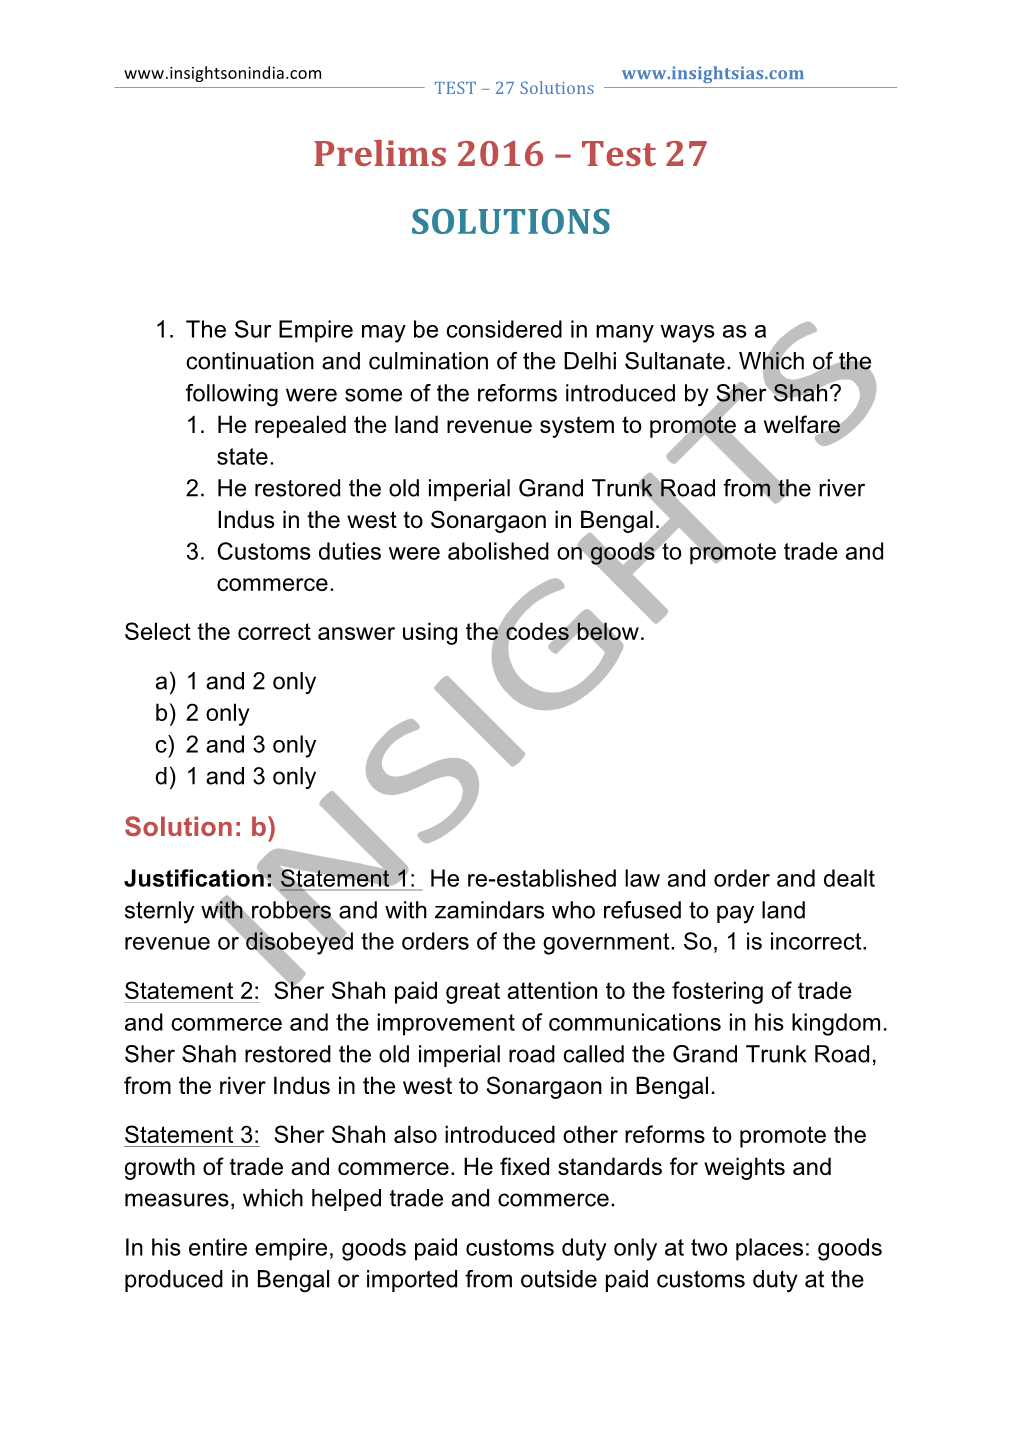 Prelims 2016 – Test 27 SOLUTIONS